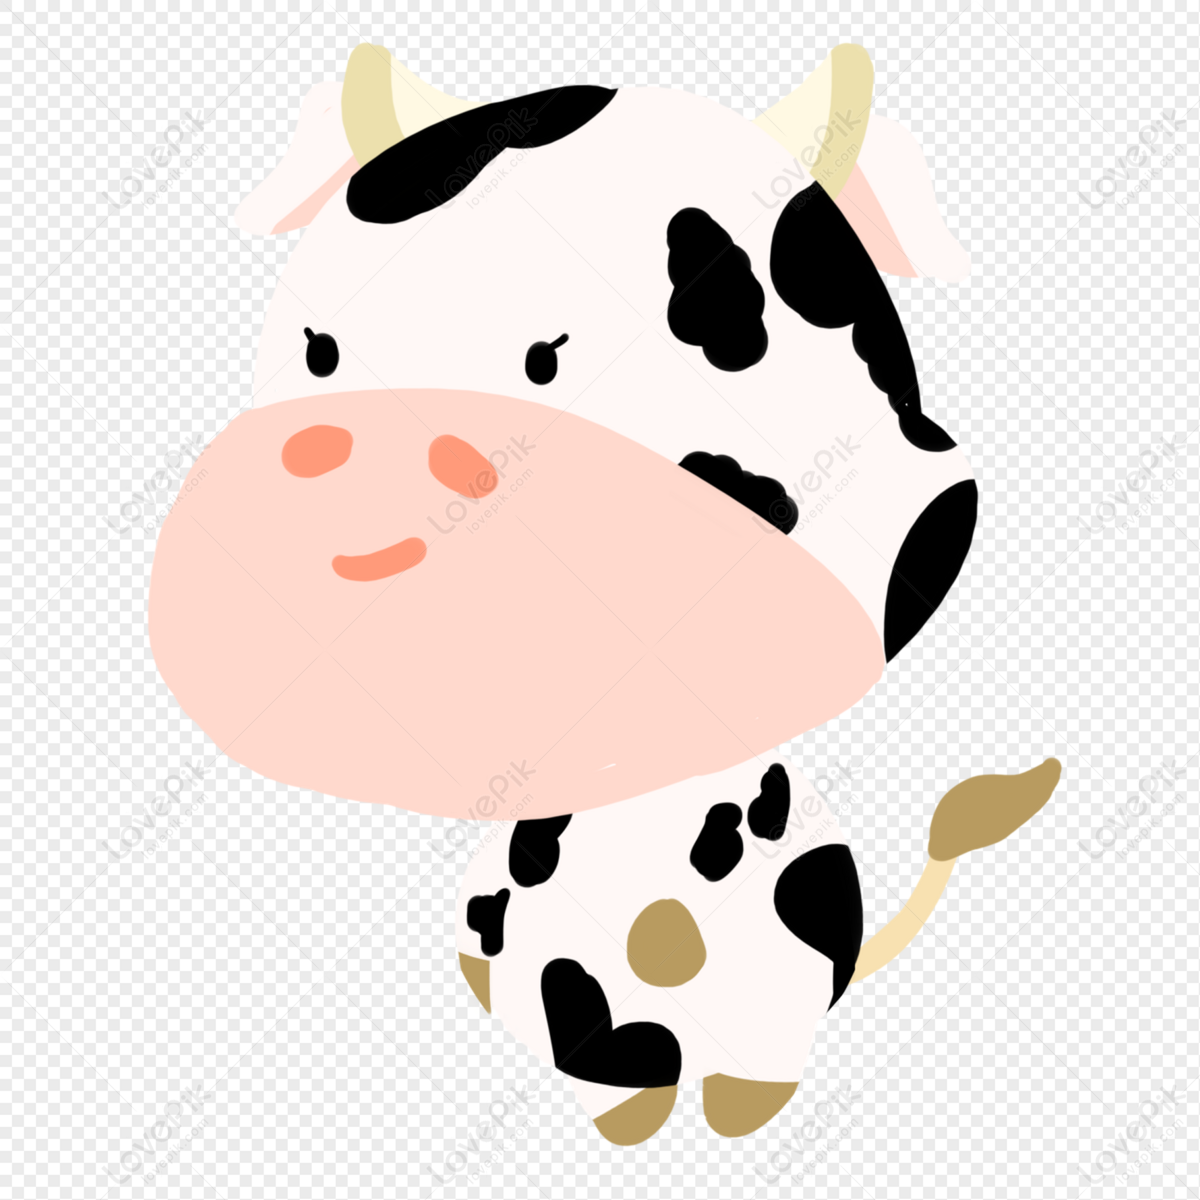 Cow PNG Free Download And Clipart Image For Free Download - Lovepik |  401257993